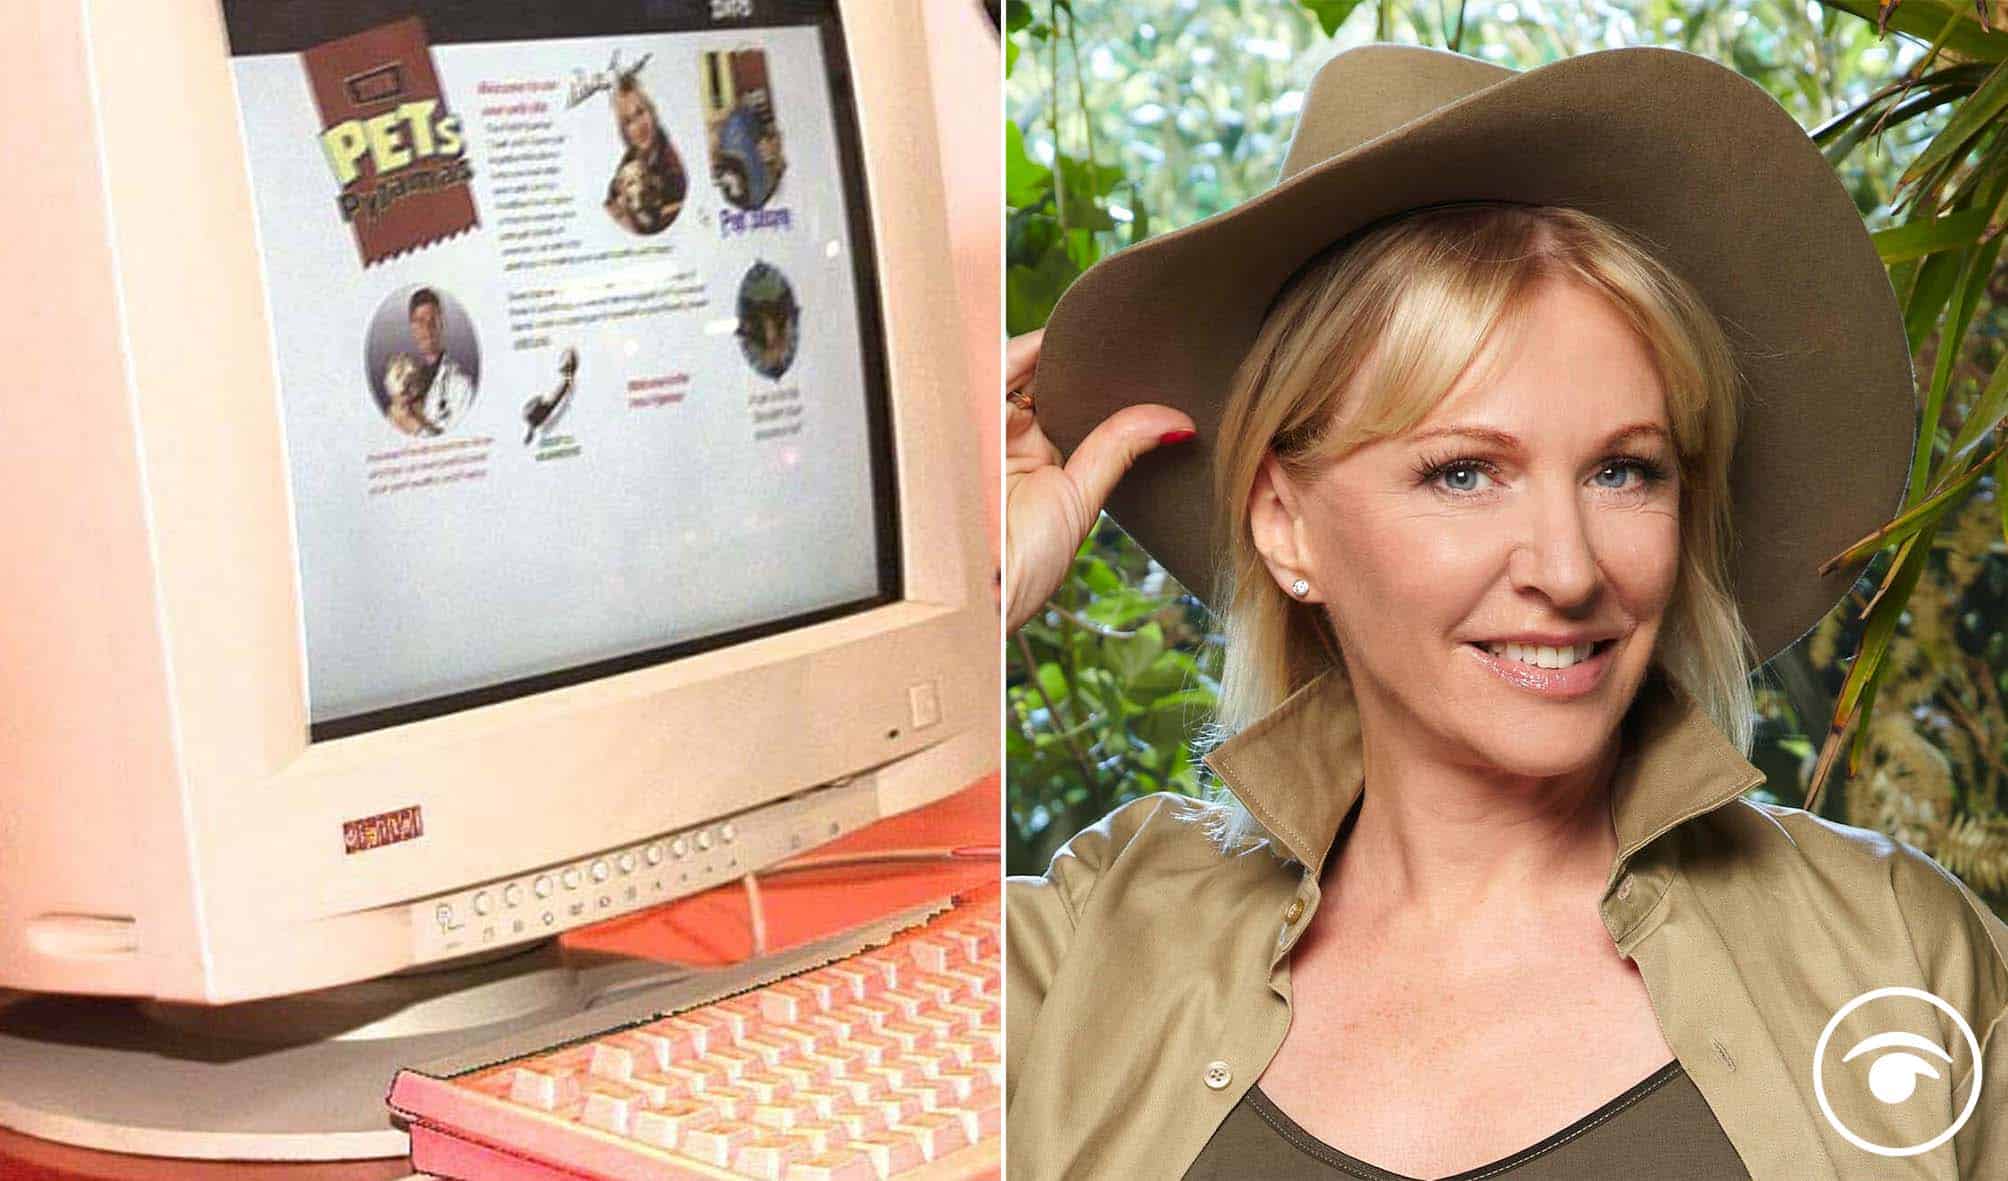 Bemused reactions after Nadine Dorries says ‘we’ve had the internet for 10 years’